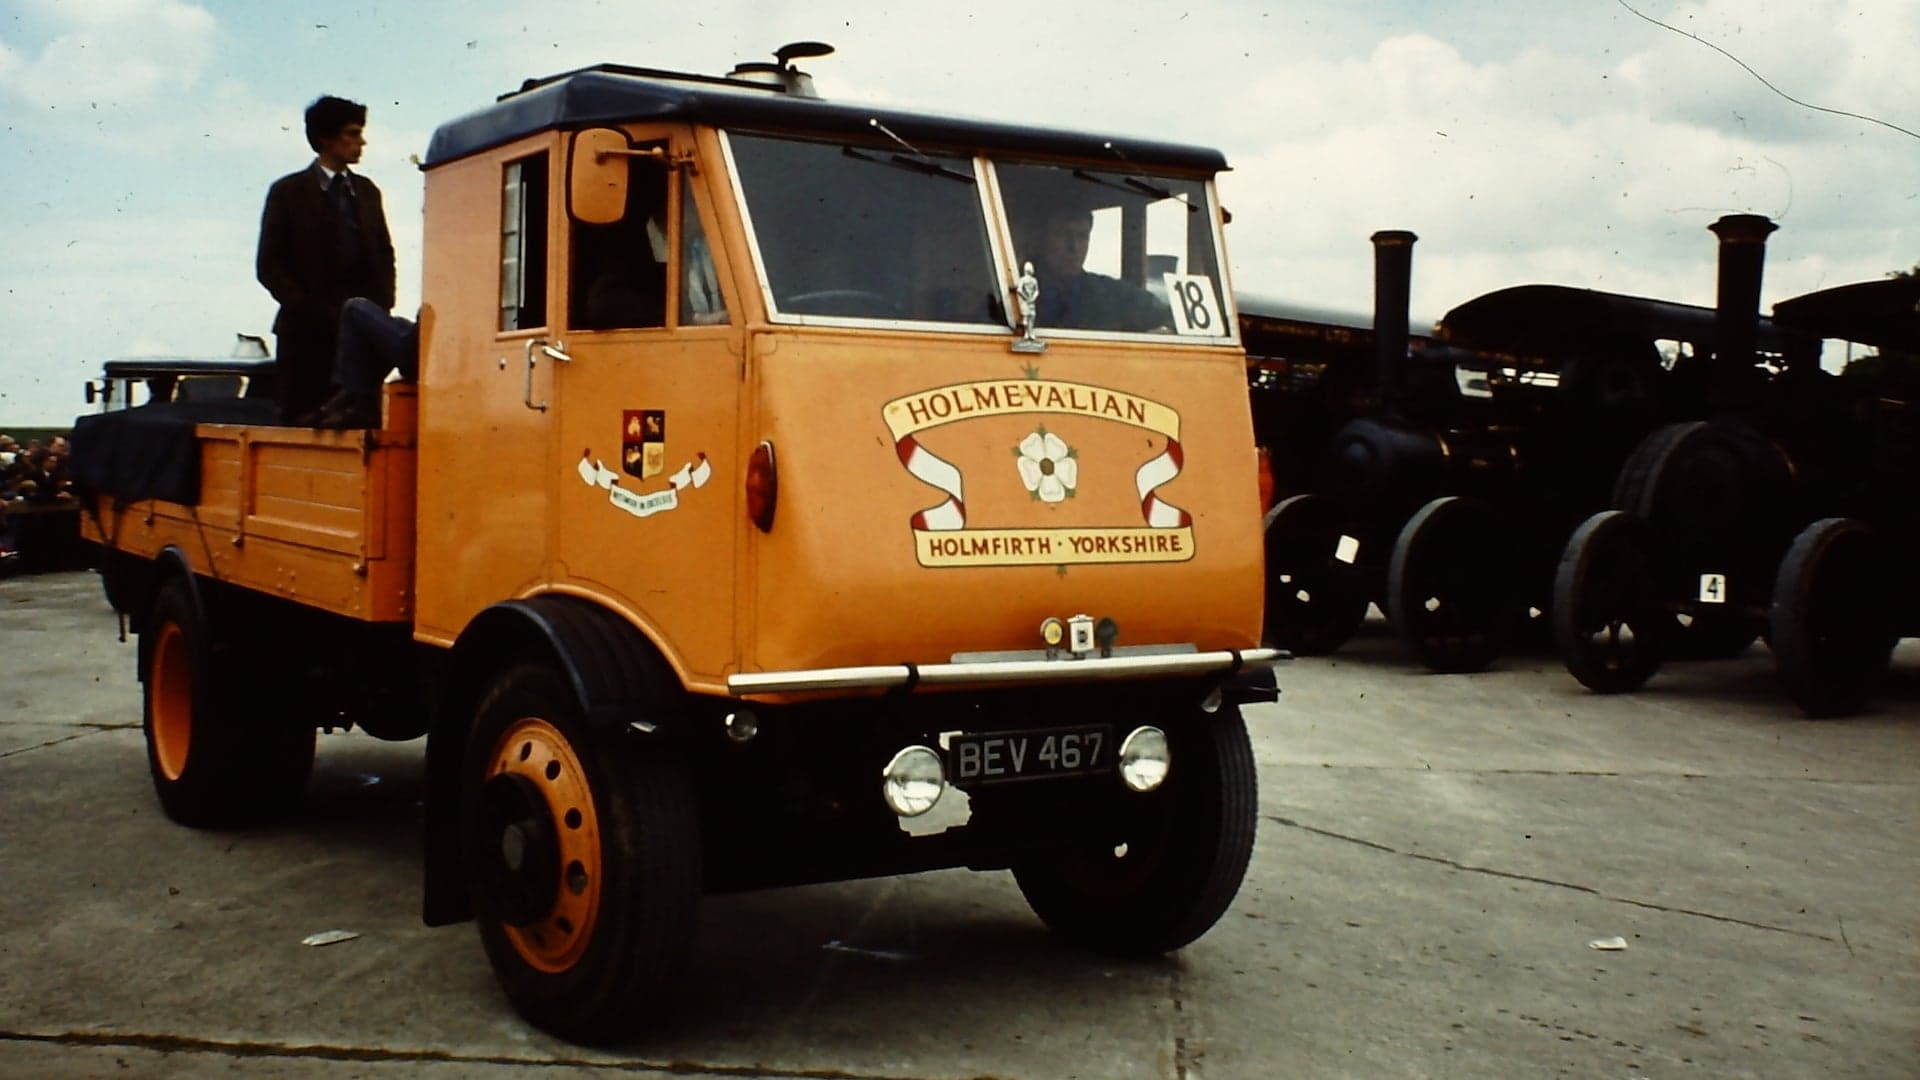 Britain Was Still Trying to Make Steam Trucks Happen in the 1930s